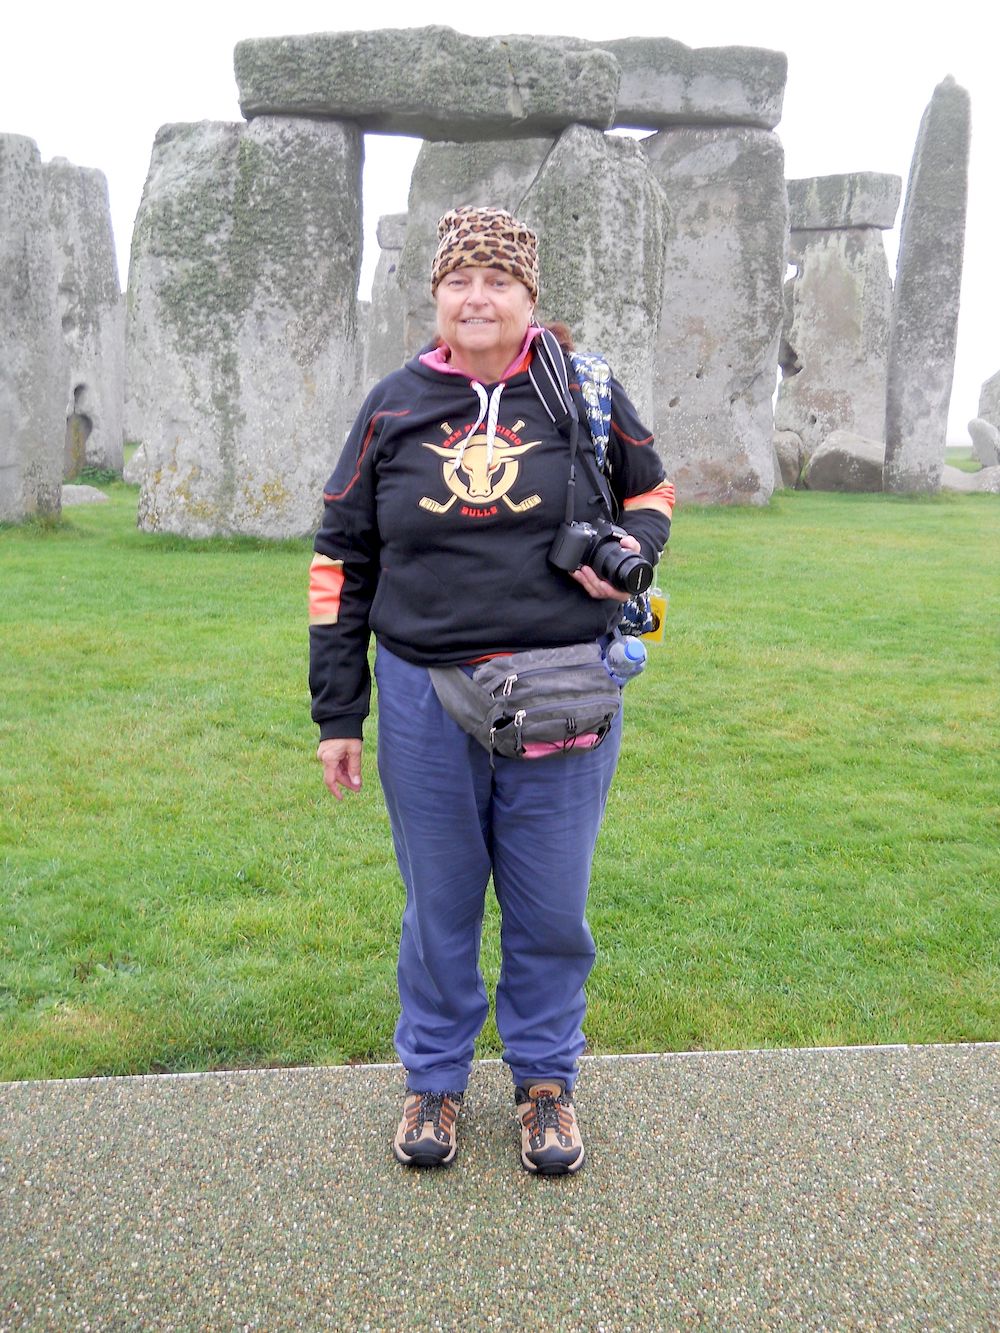 Beth at Stonehenge, 2014, Salisbury Plain, Whitshire, England. Beth shares, “I seek out sites like this, and chase total solar eclipses. The significance of this trip to England was that it was a “victory lap” after a long joint genealogy project. As a young adult, I’d reveled in a Celtic heritage I would see narrow before my very eyes when a cousin showed up and blew up my maternal Grandfather’s California reinvention story.  The family had been in Tidewater Virginia for 200 years before he was born in Maryland, and was pretty seriously English. With three families in England that might have been ours, each one going back a far piece, a small group of cousins coalesced and spent years figuring out which was ours and how we connected to it. My sense of my origins had completely turned around halfway through my life, and making sense of it was quite the adventure.” Photo courtesy of Beth Elliott.